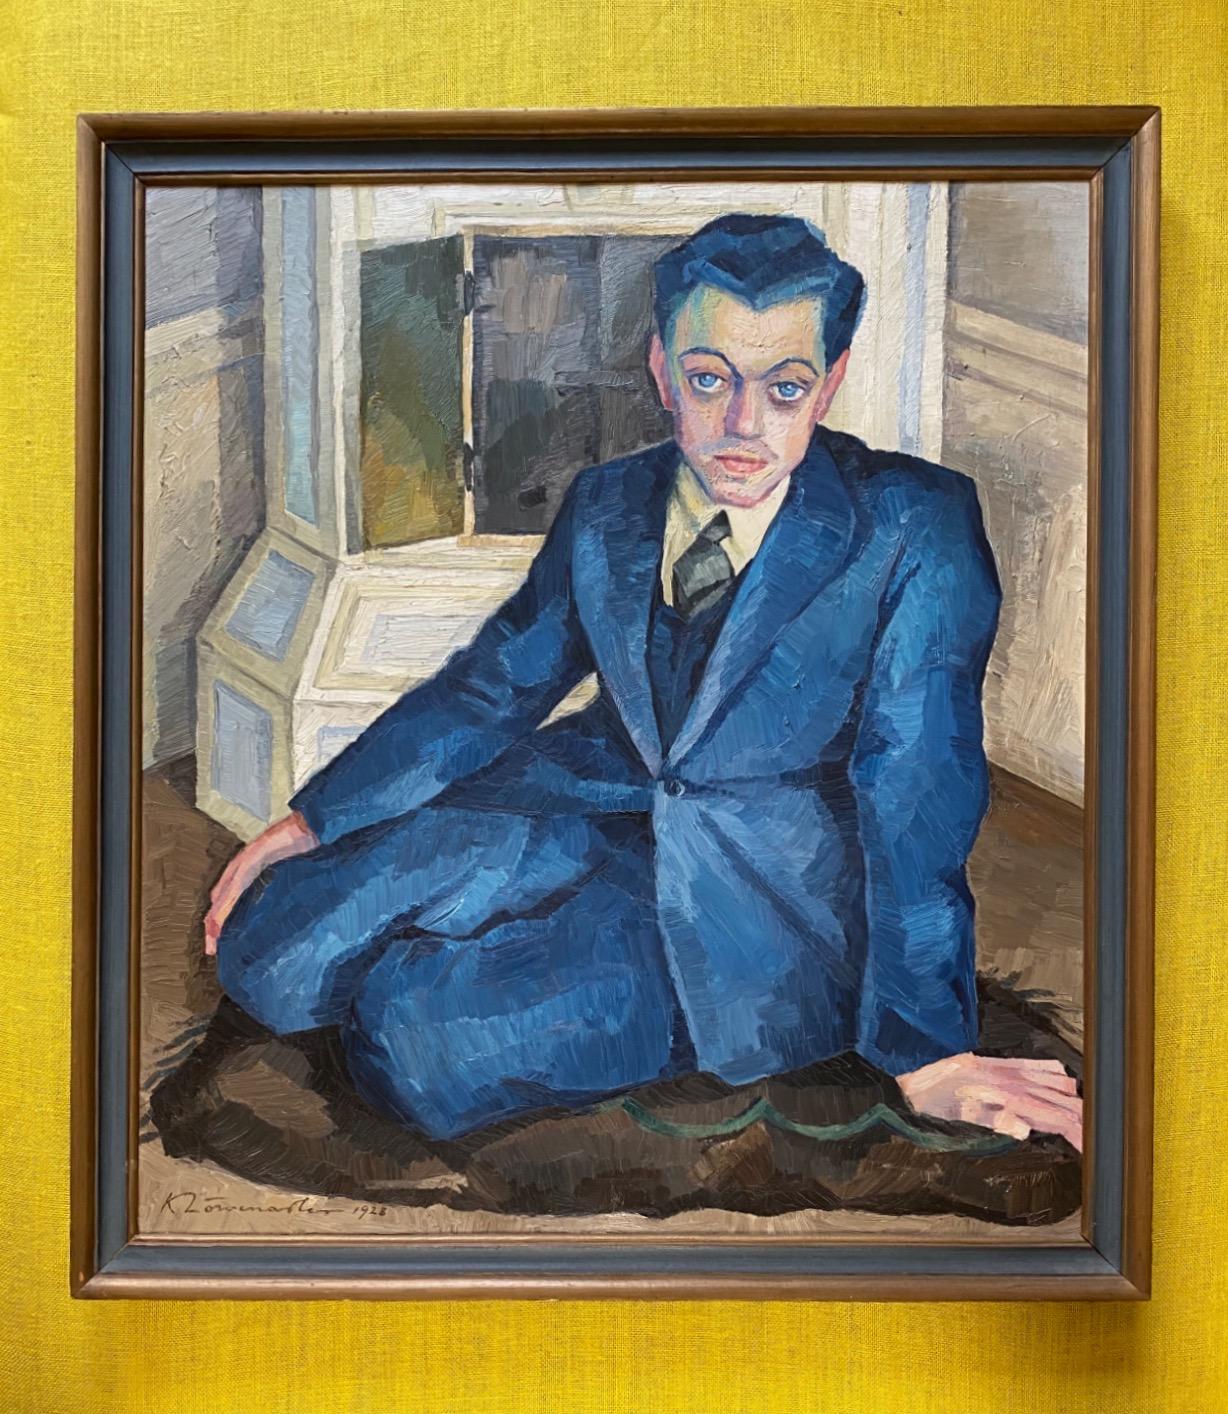 
A fine, large and impressive art deco oil on canvas by the celebrated Swedish artist Kjell Hermansson. signed K Löwenadler and dated 1928, this rare, and richly coloured work depicts a handsome dark haired gentleman seated in front of a